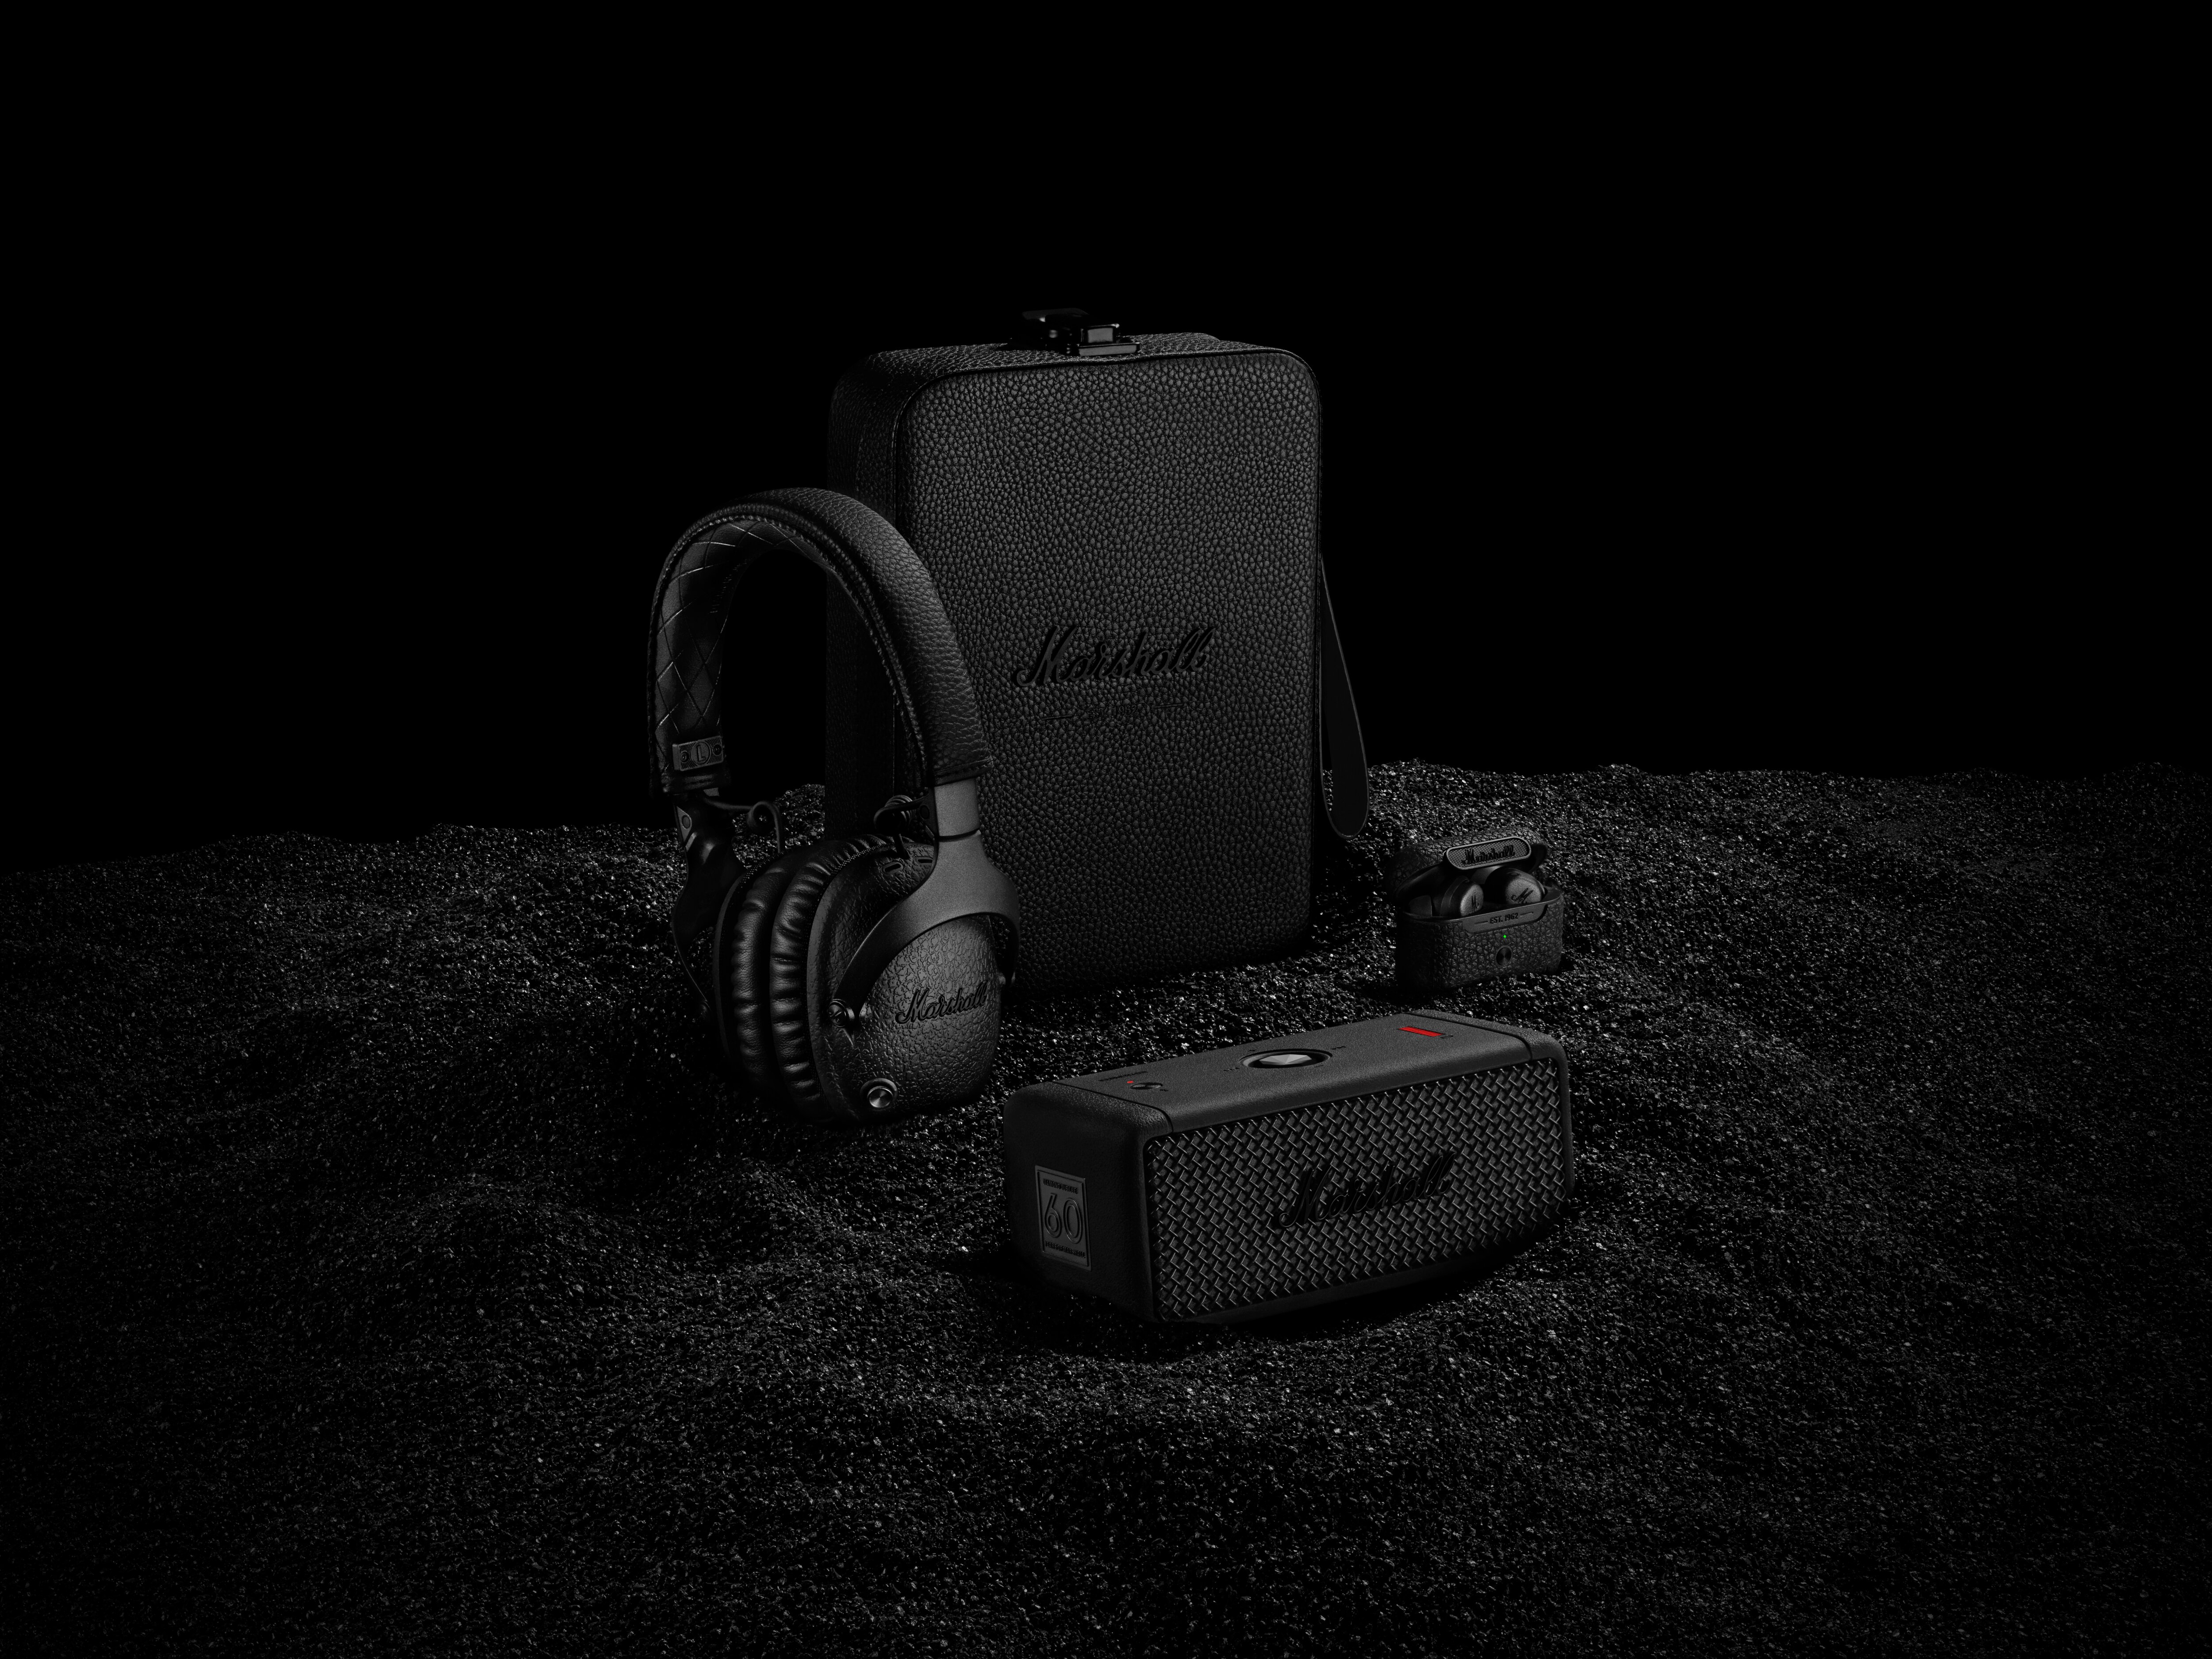 Marshall release limited edition wireless headphones for diamond | T3